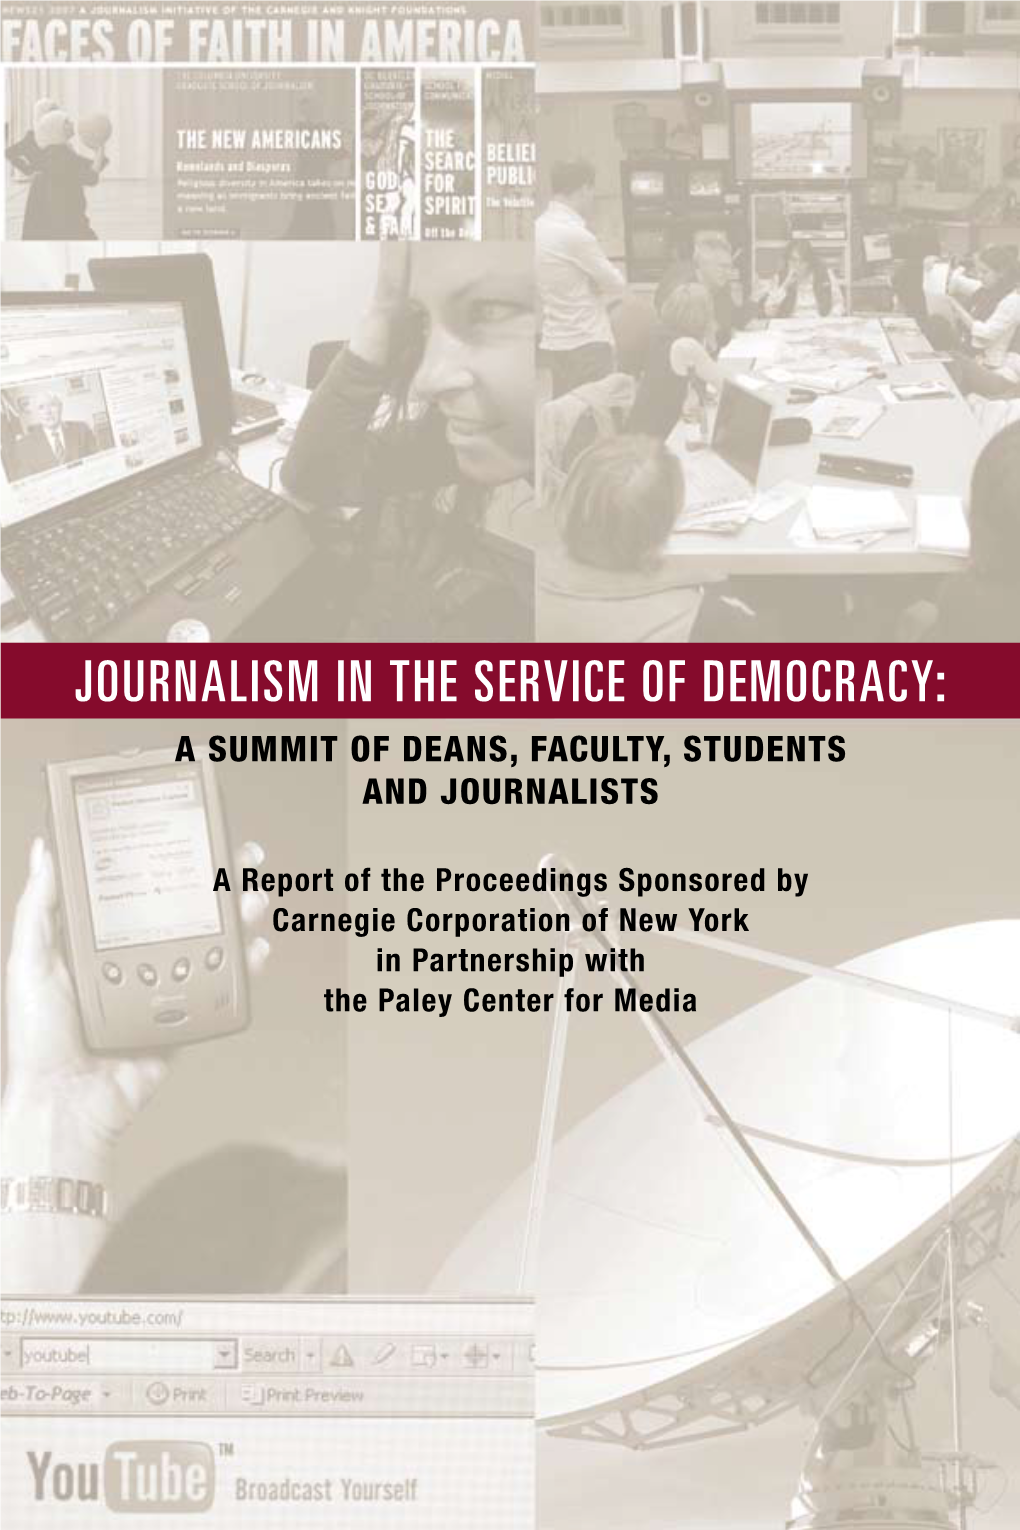 Journalism in the Service of Democracy: a Summit of Deans, Faculty, Students and Journalists